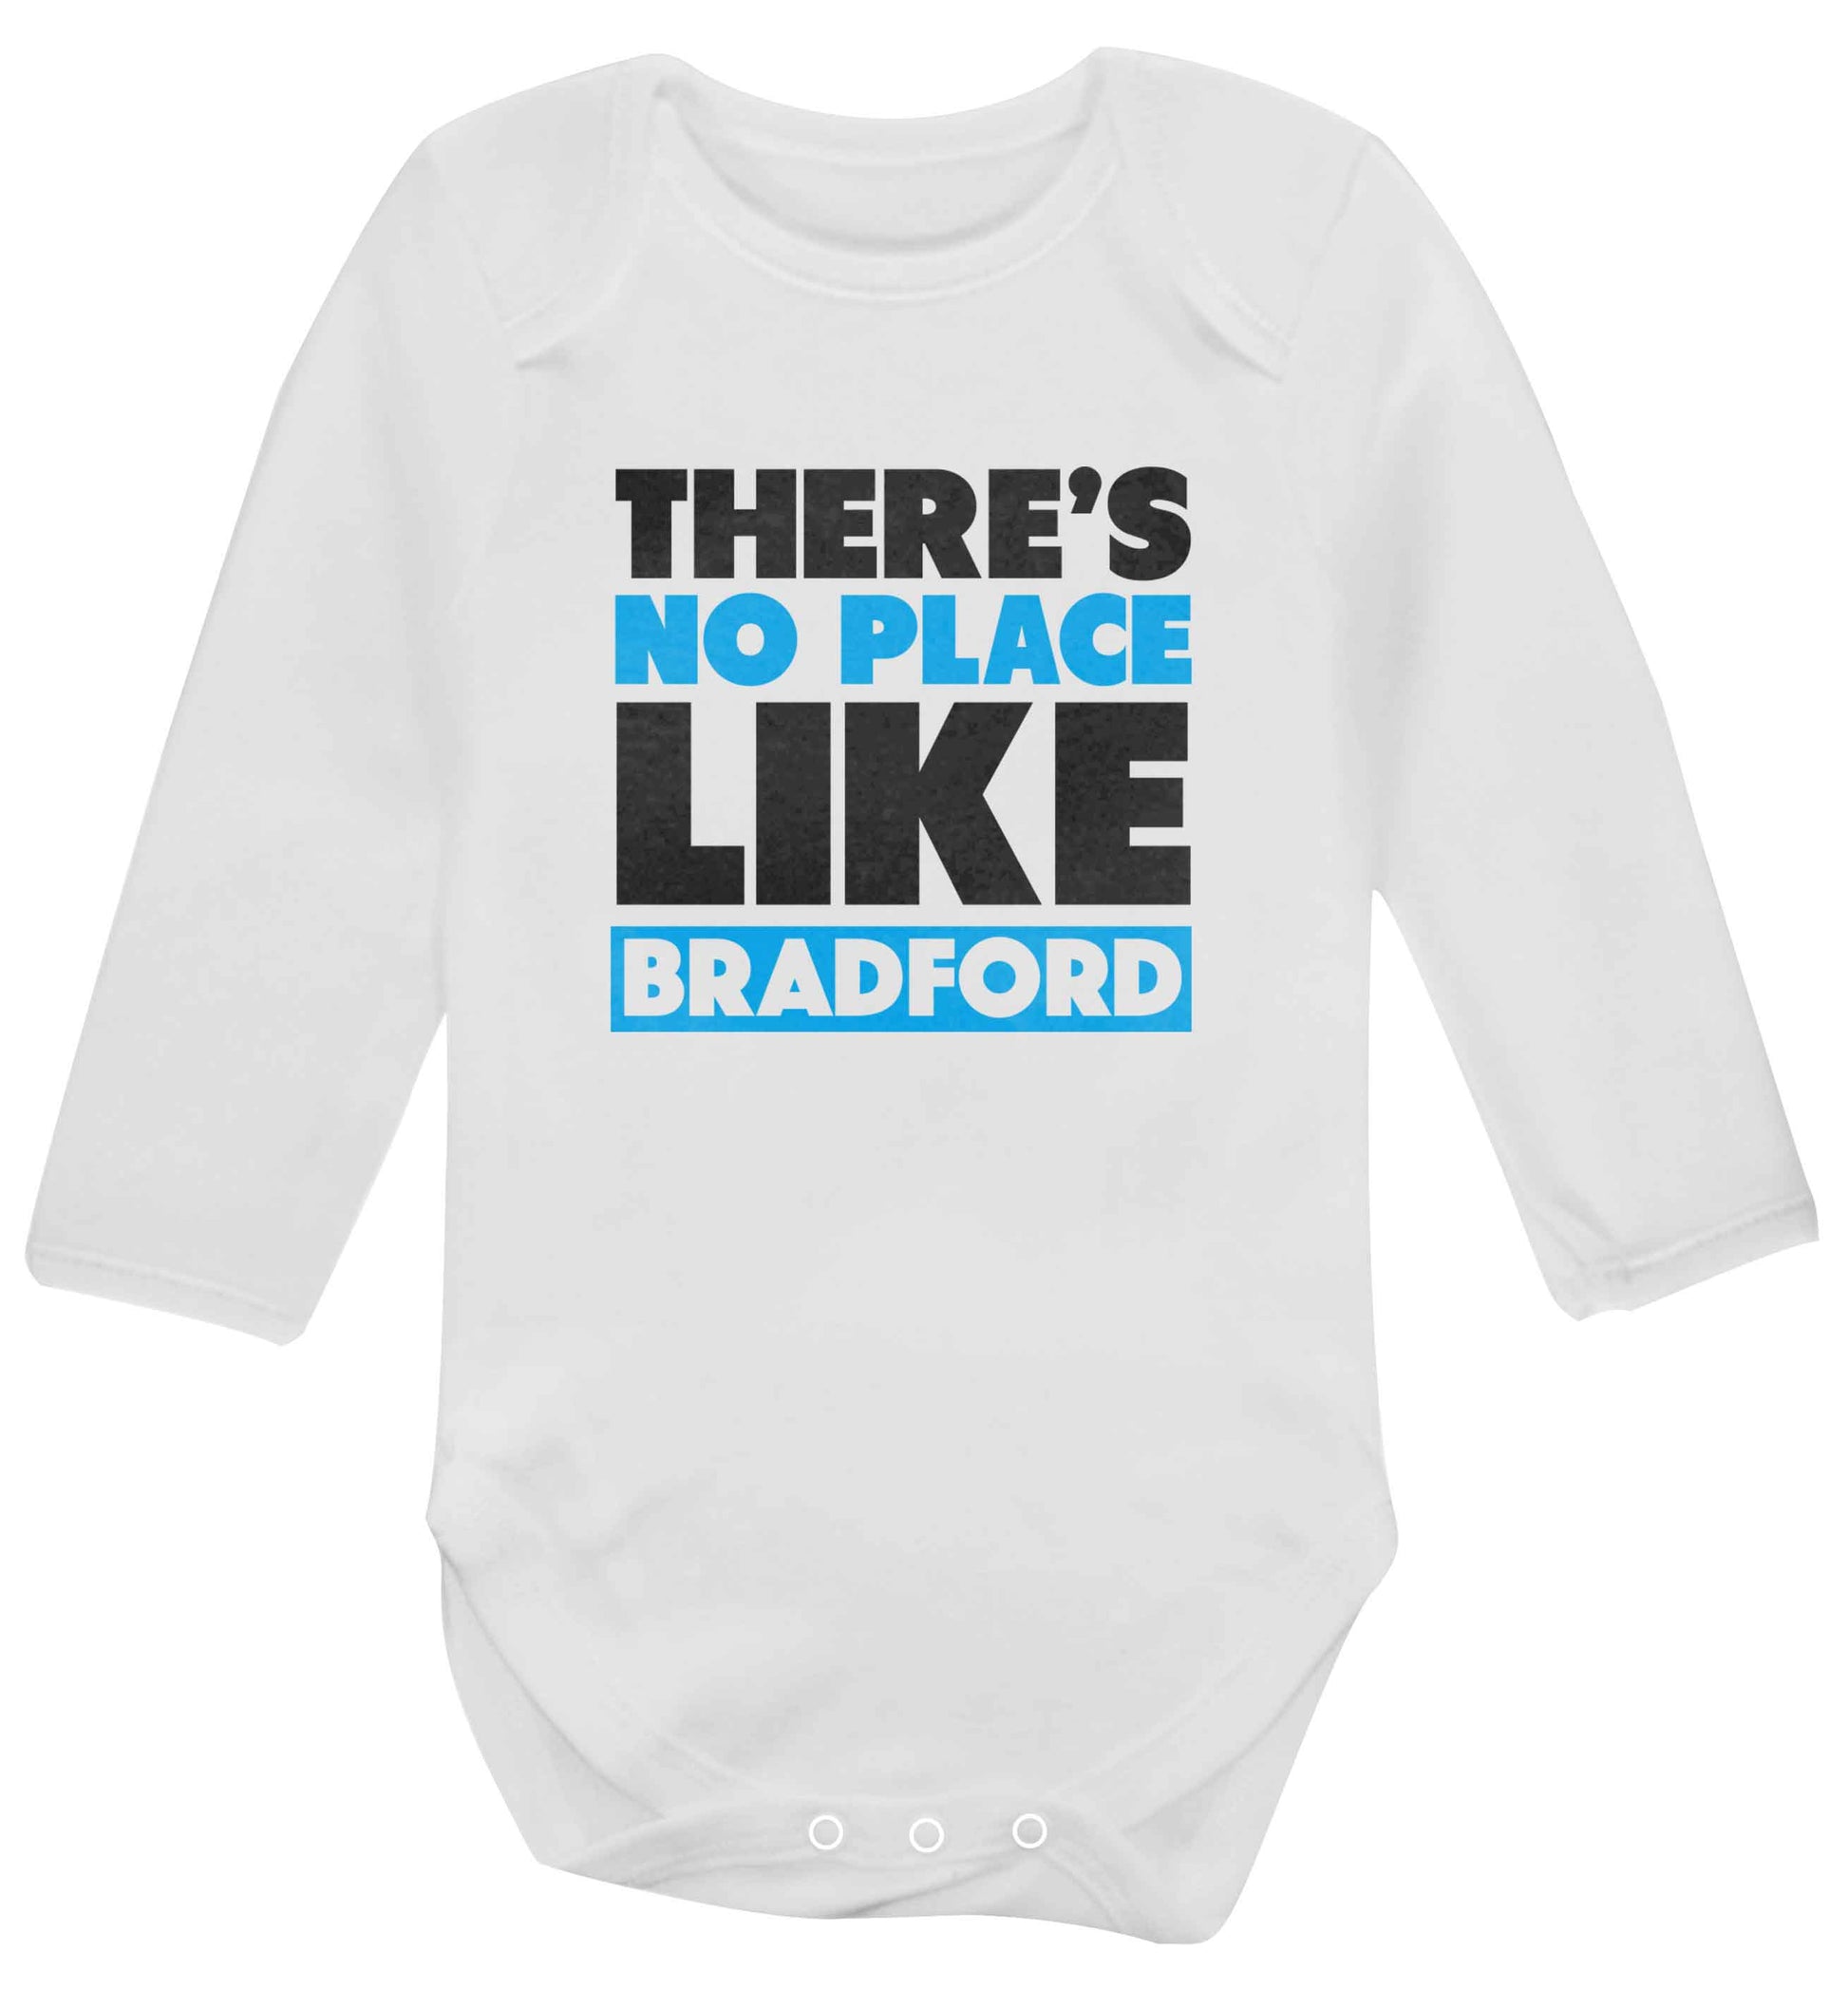 There's no place like Bradford baby vest long sleeved white 6-12 months